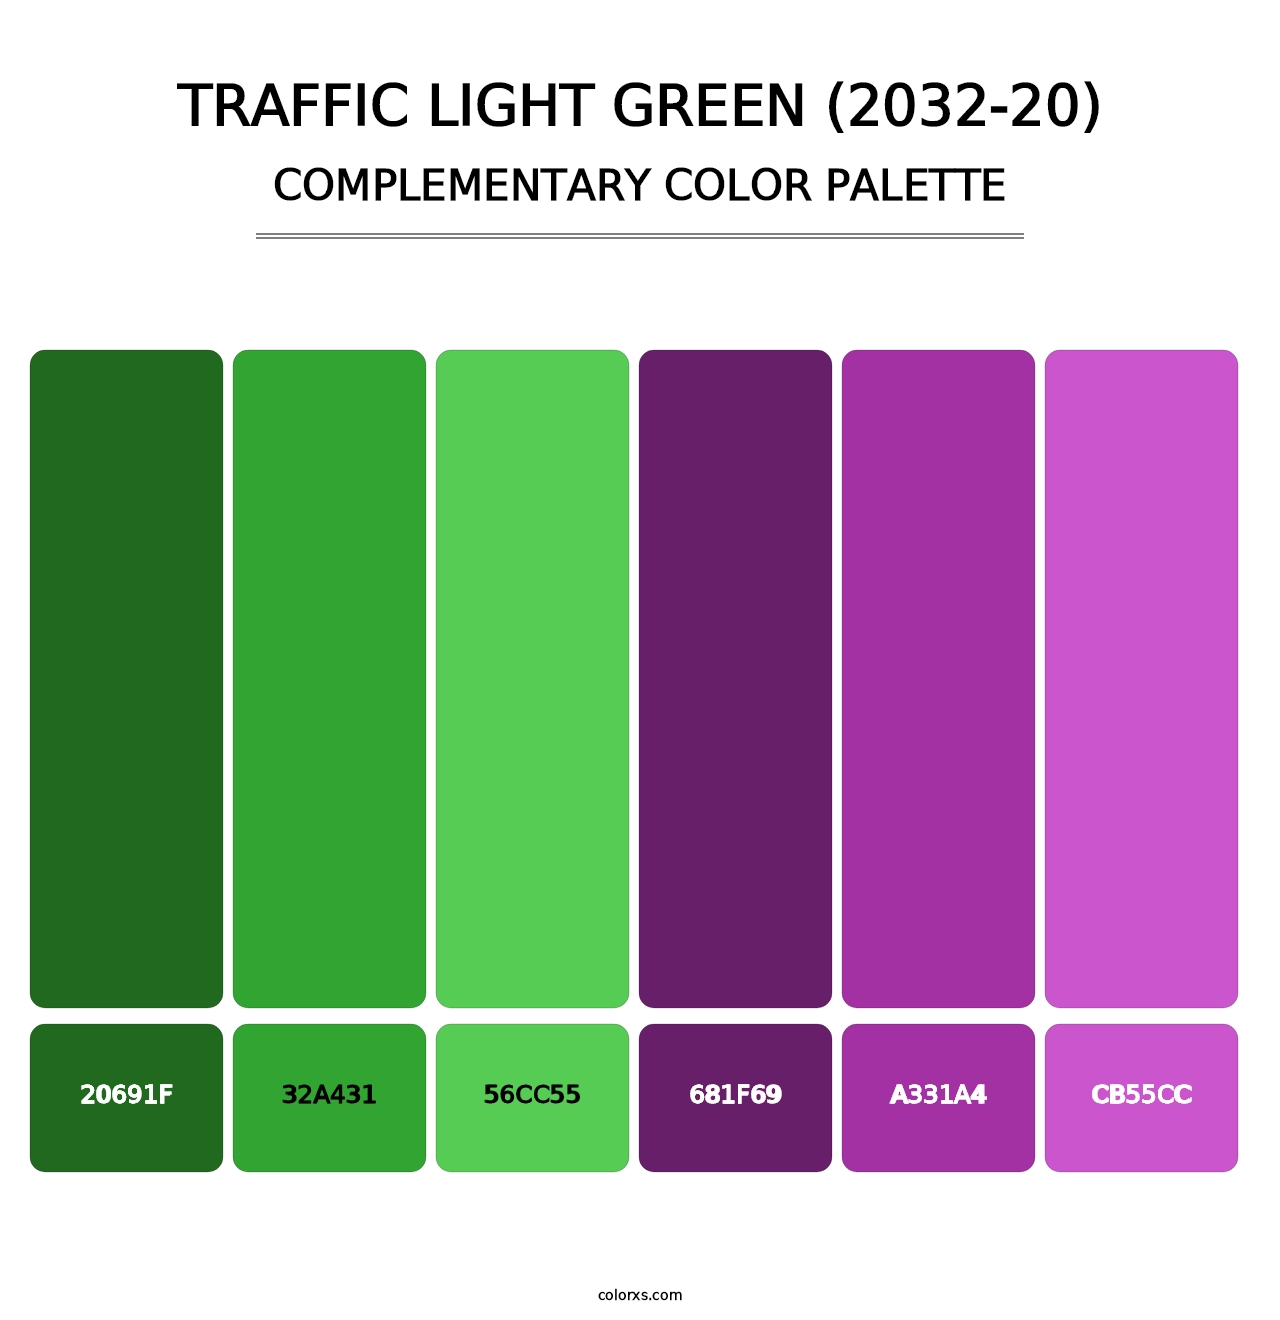 Traffic Light Green (2032-20) - Complementary Color Palette